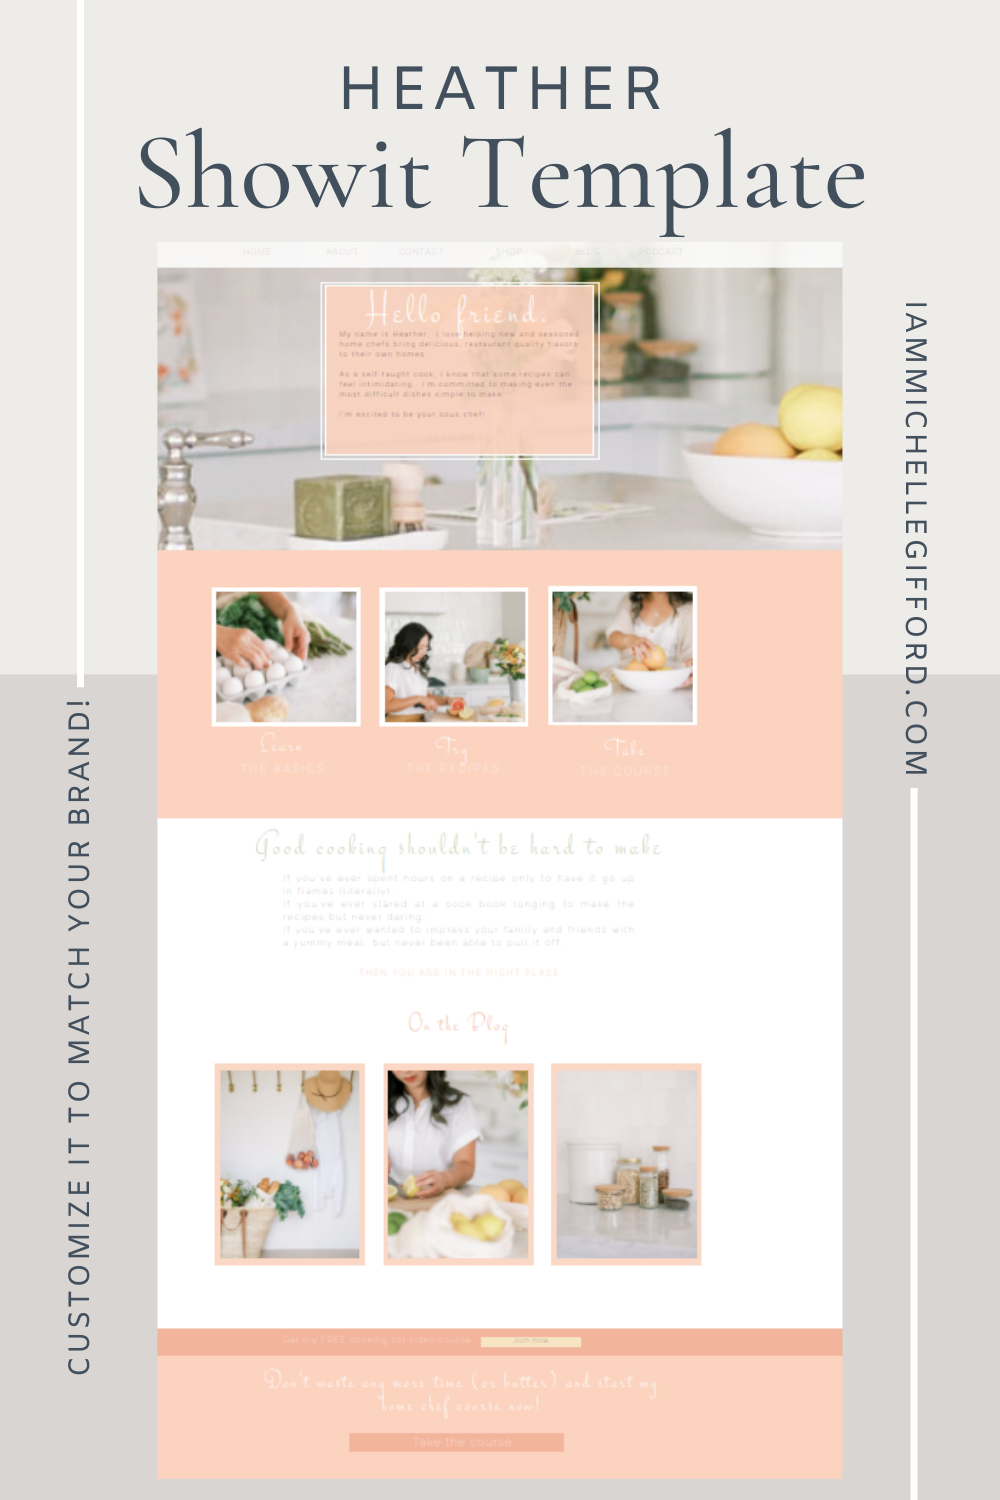 Pick this showit template to give your website the upgrade it deserves. www.iammichellegifford.com